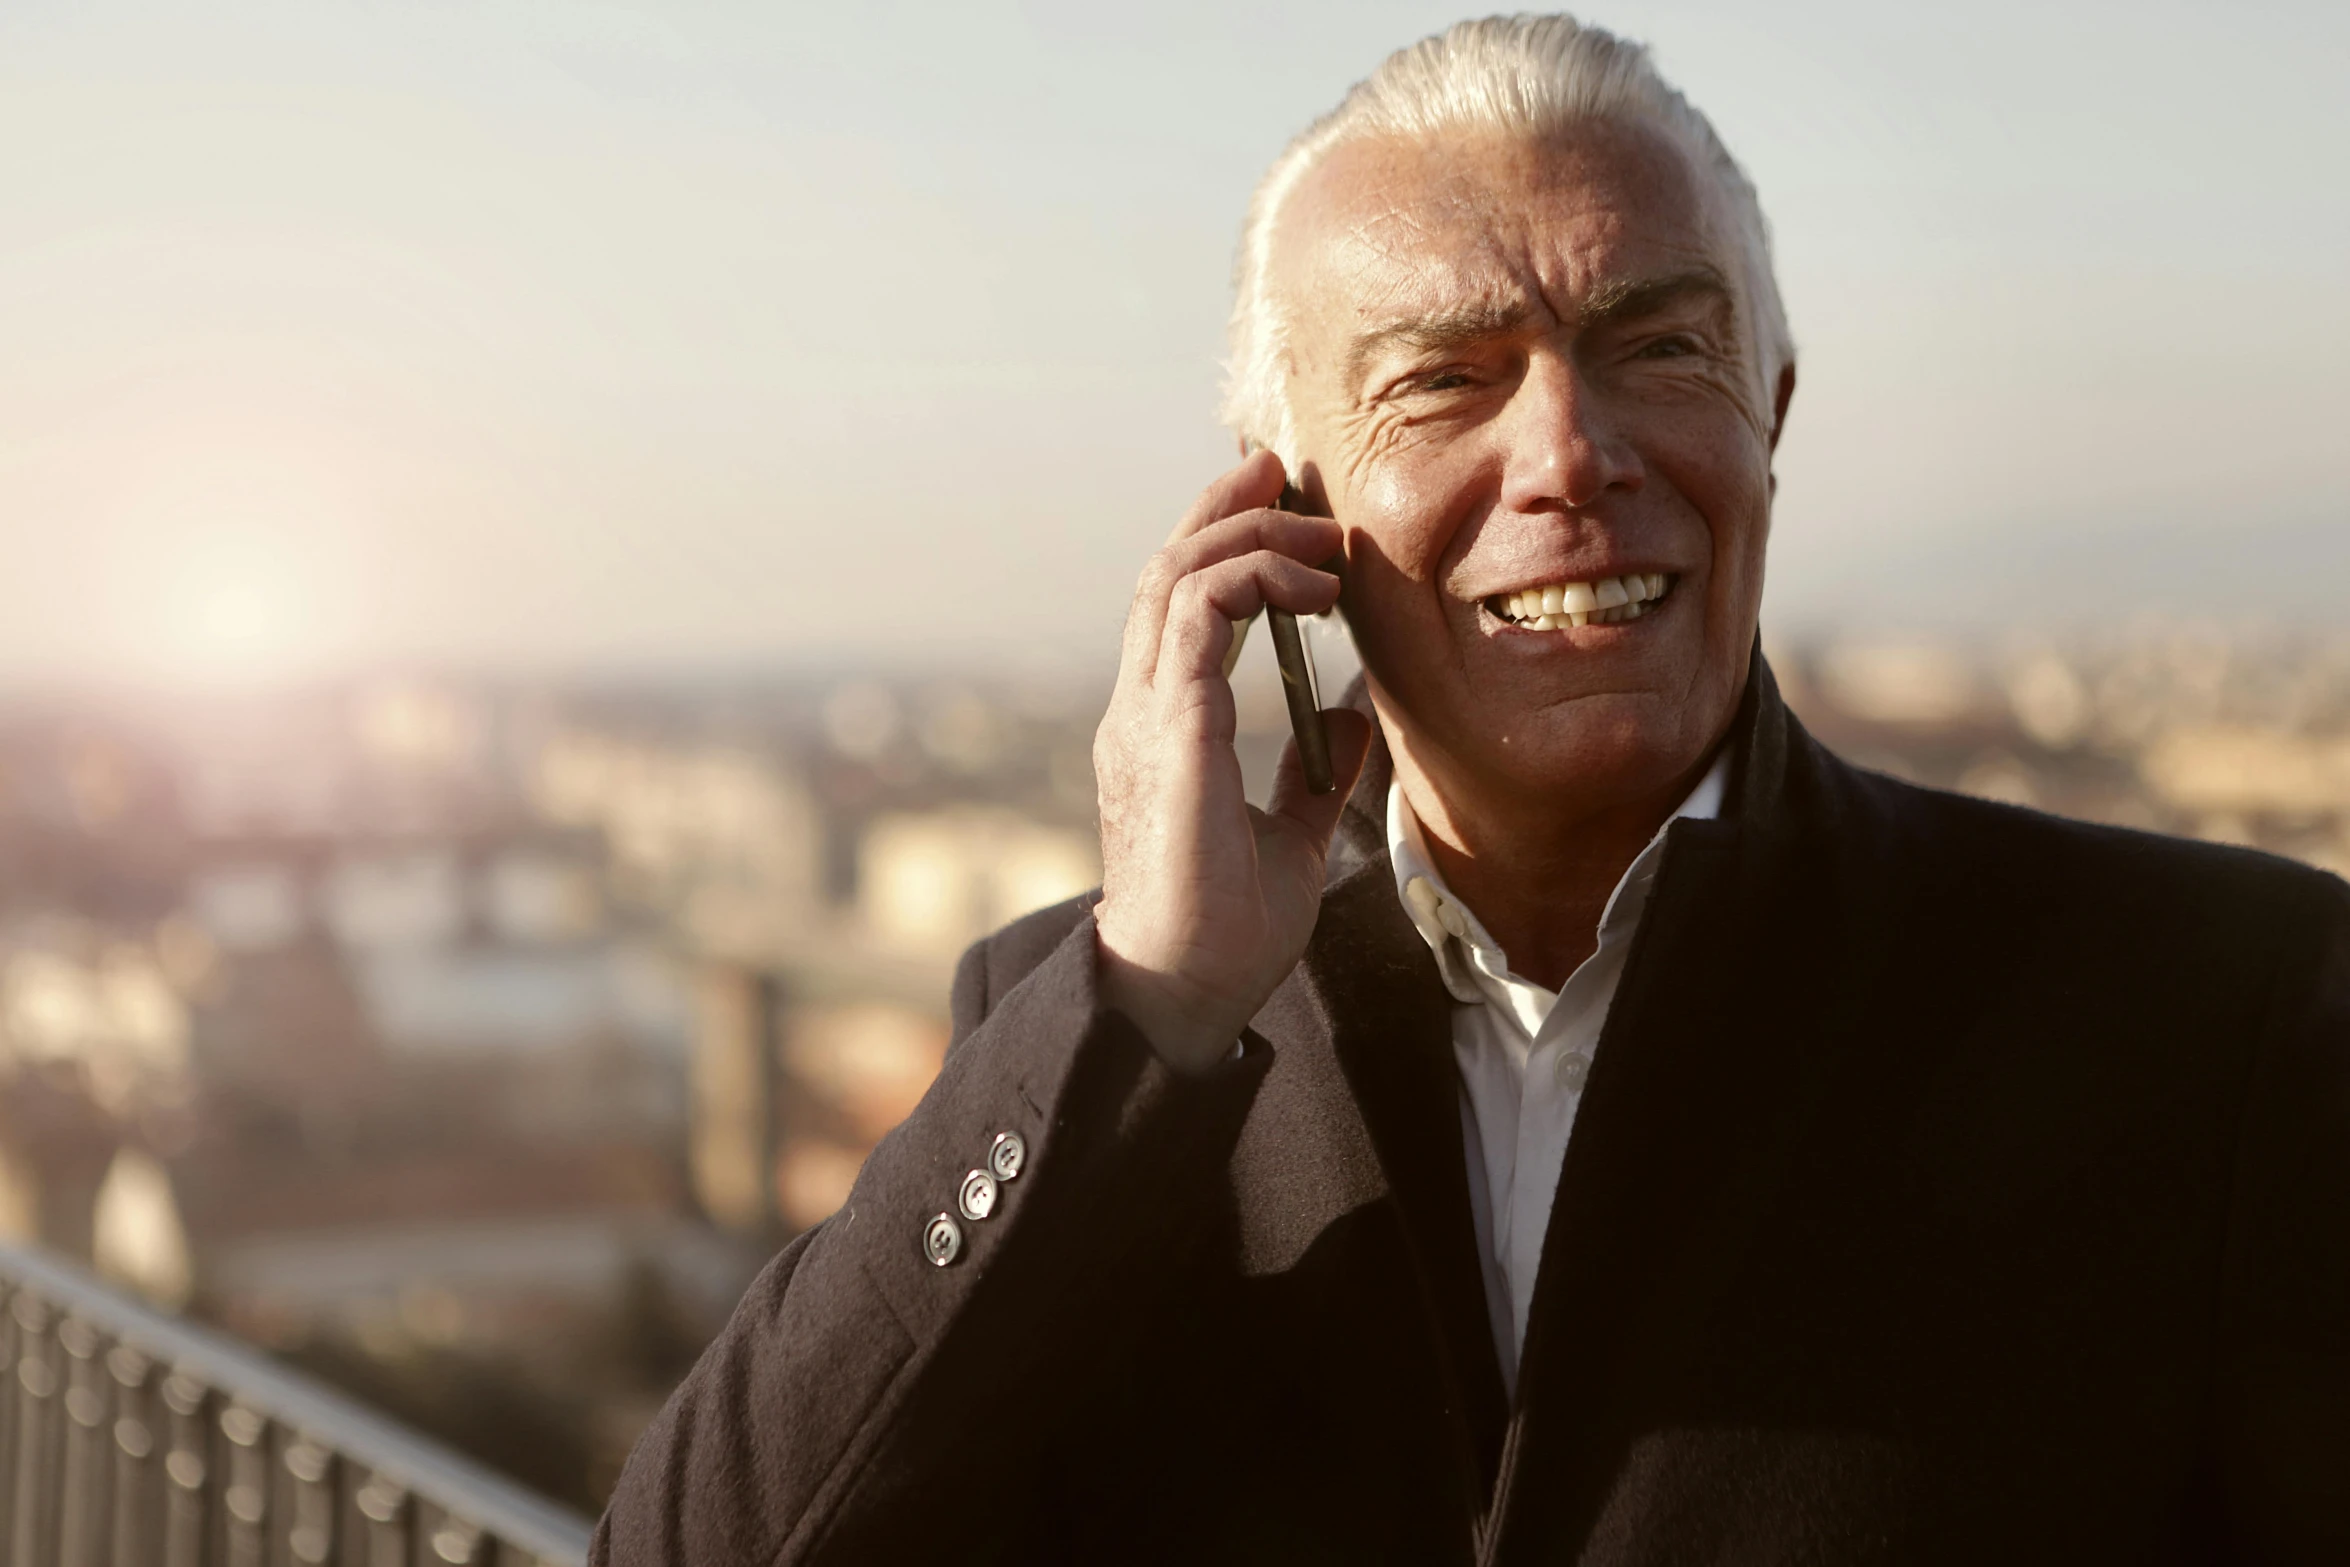 a close up of a person talking on a cell phone, a photo, white haired, smiling man, selling insurance, morning sun